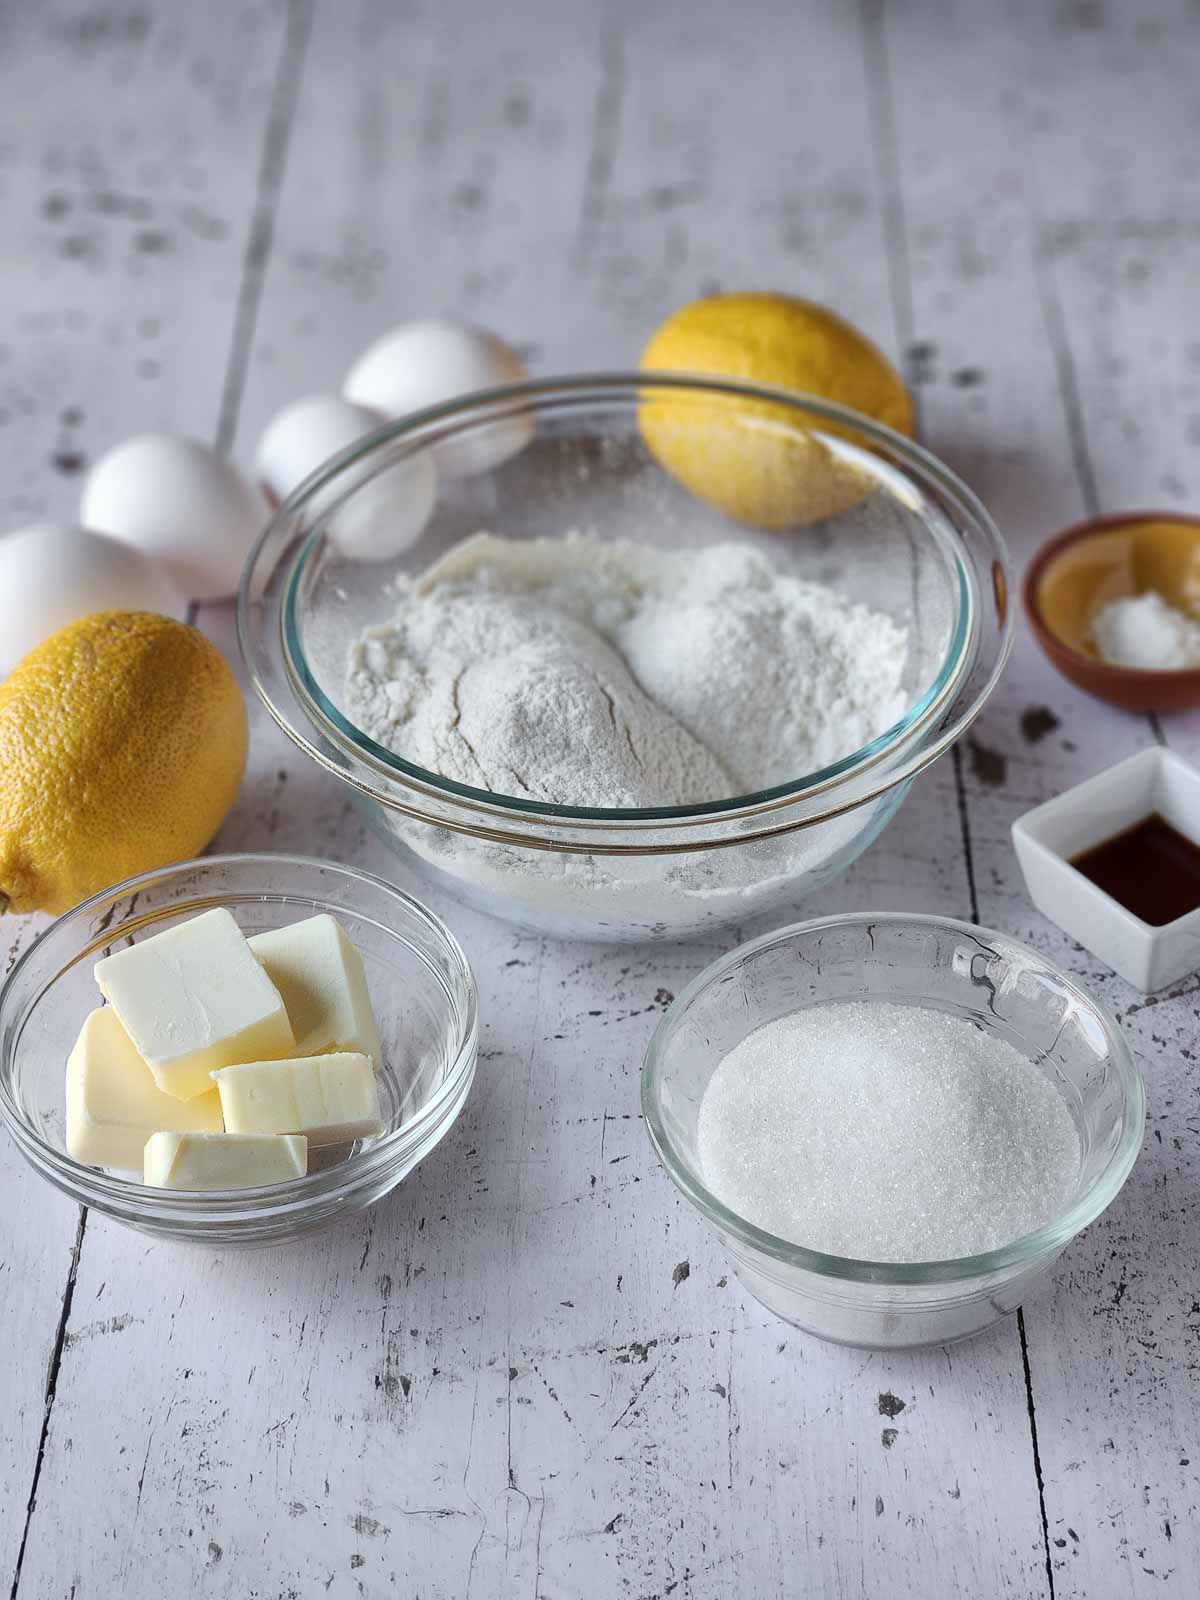 Ingredients for lemon pizzelles on white wood.